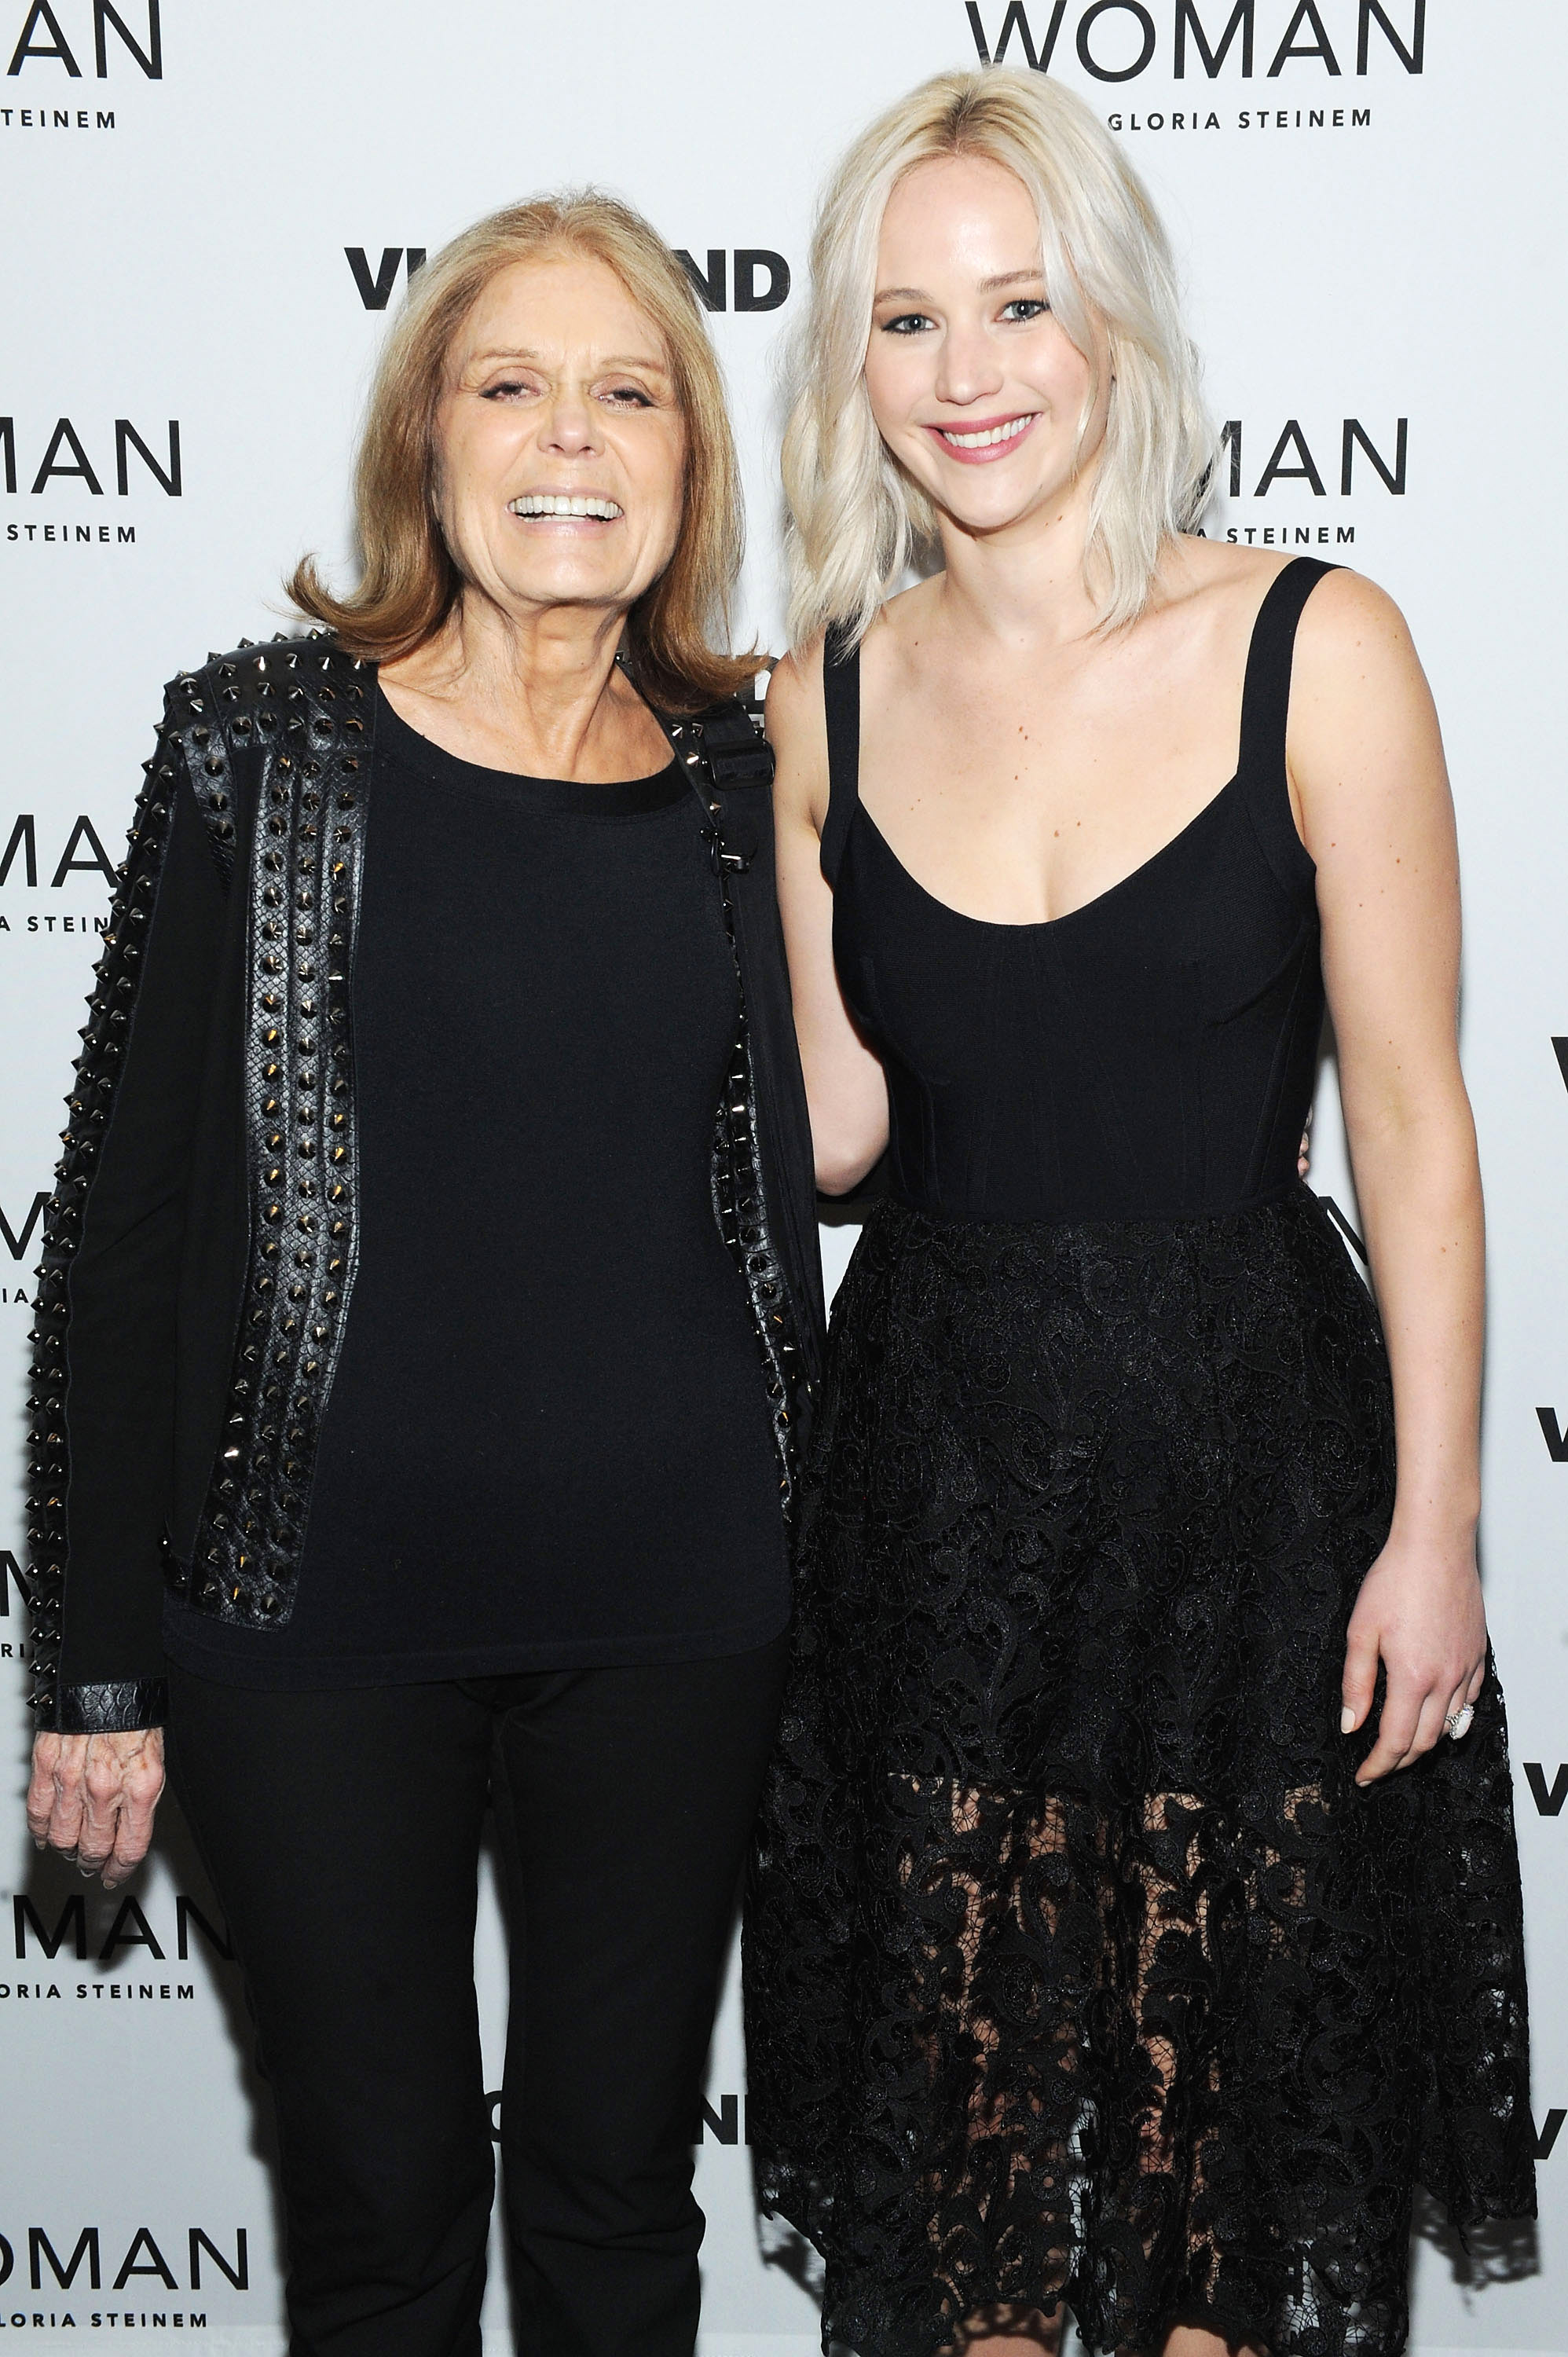 Steinem and Lawrence